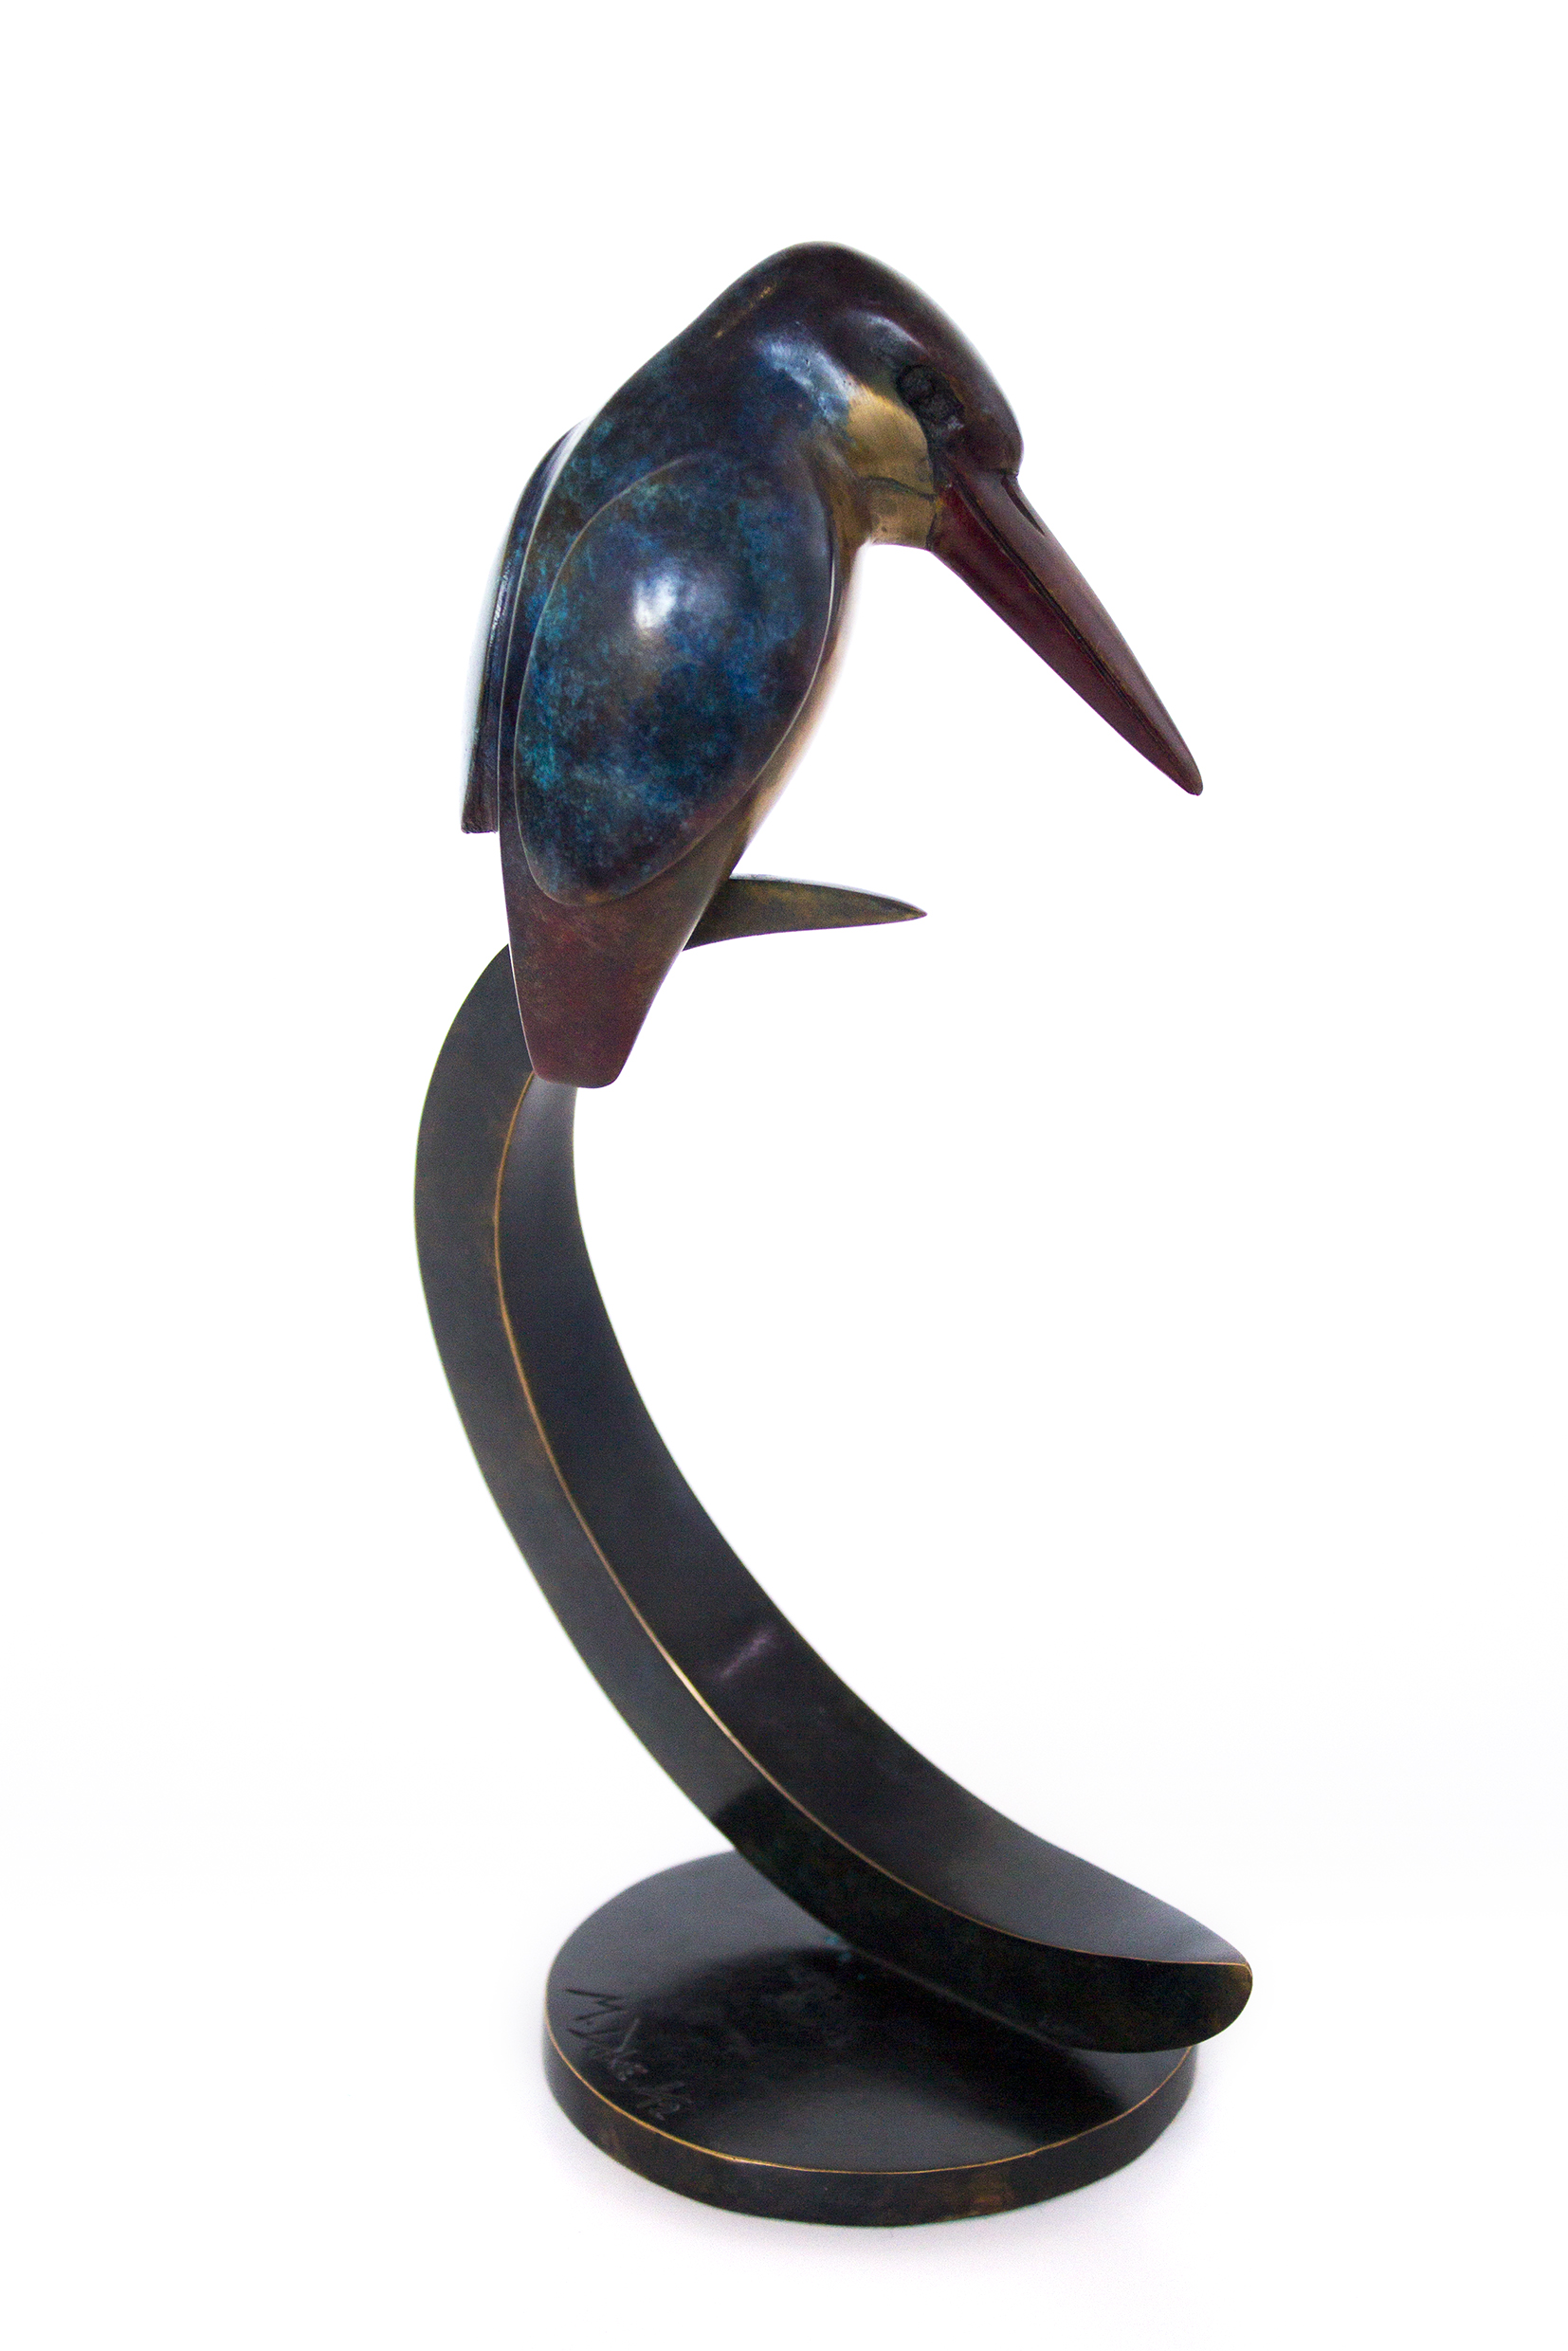 We are delighted to announce that we have the latest sculptures in the gallery by Matt Duke.